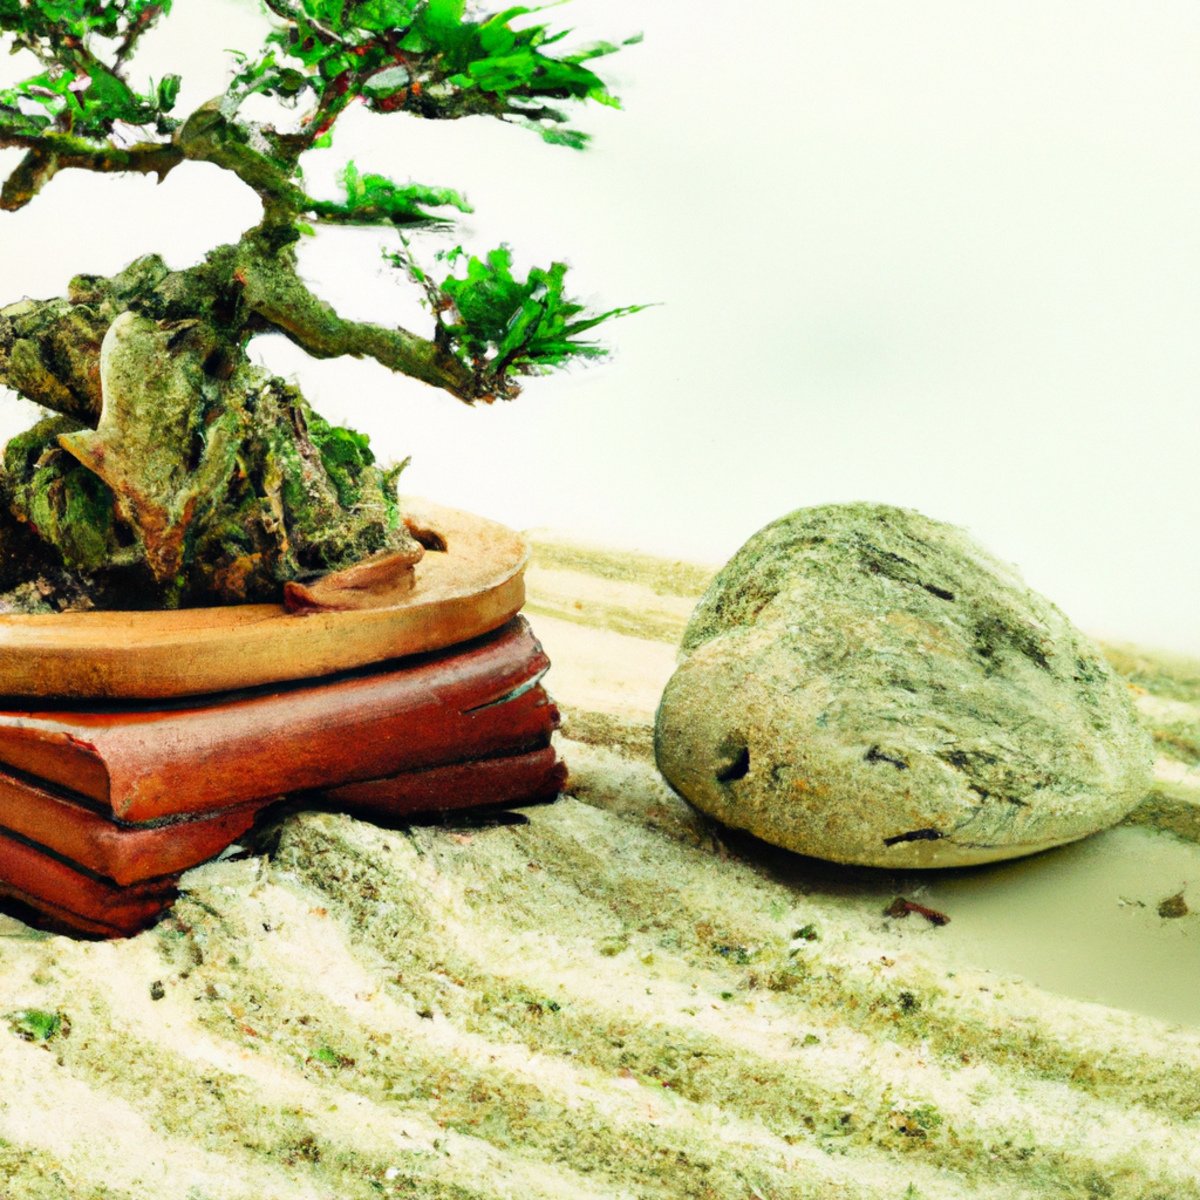 Natural skin care routines - A serene Zen garden with raked sand, pebbles, bonsai trees, and a bench, promoting mindfulness for stress relief.